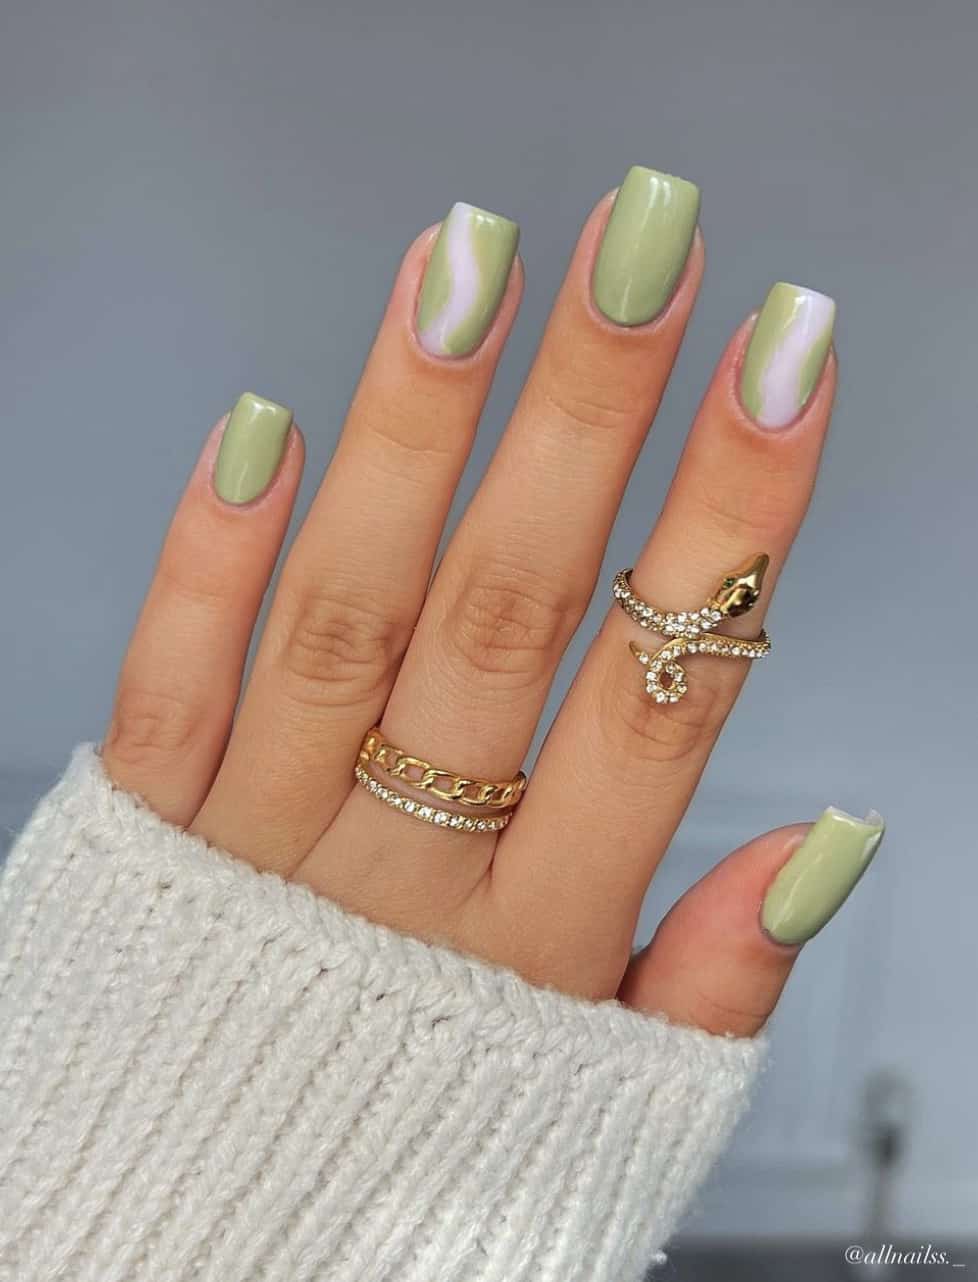 A hand with short square nails painted a light green shade with green and milky white wave accent nails